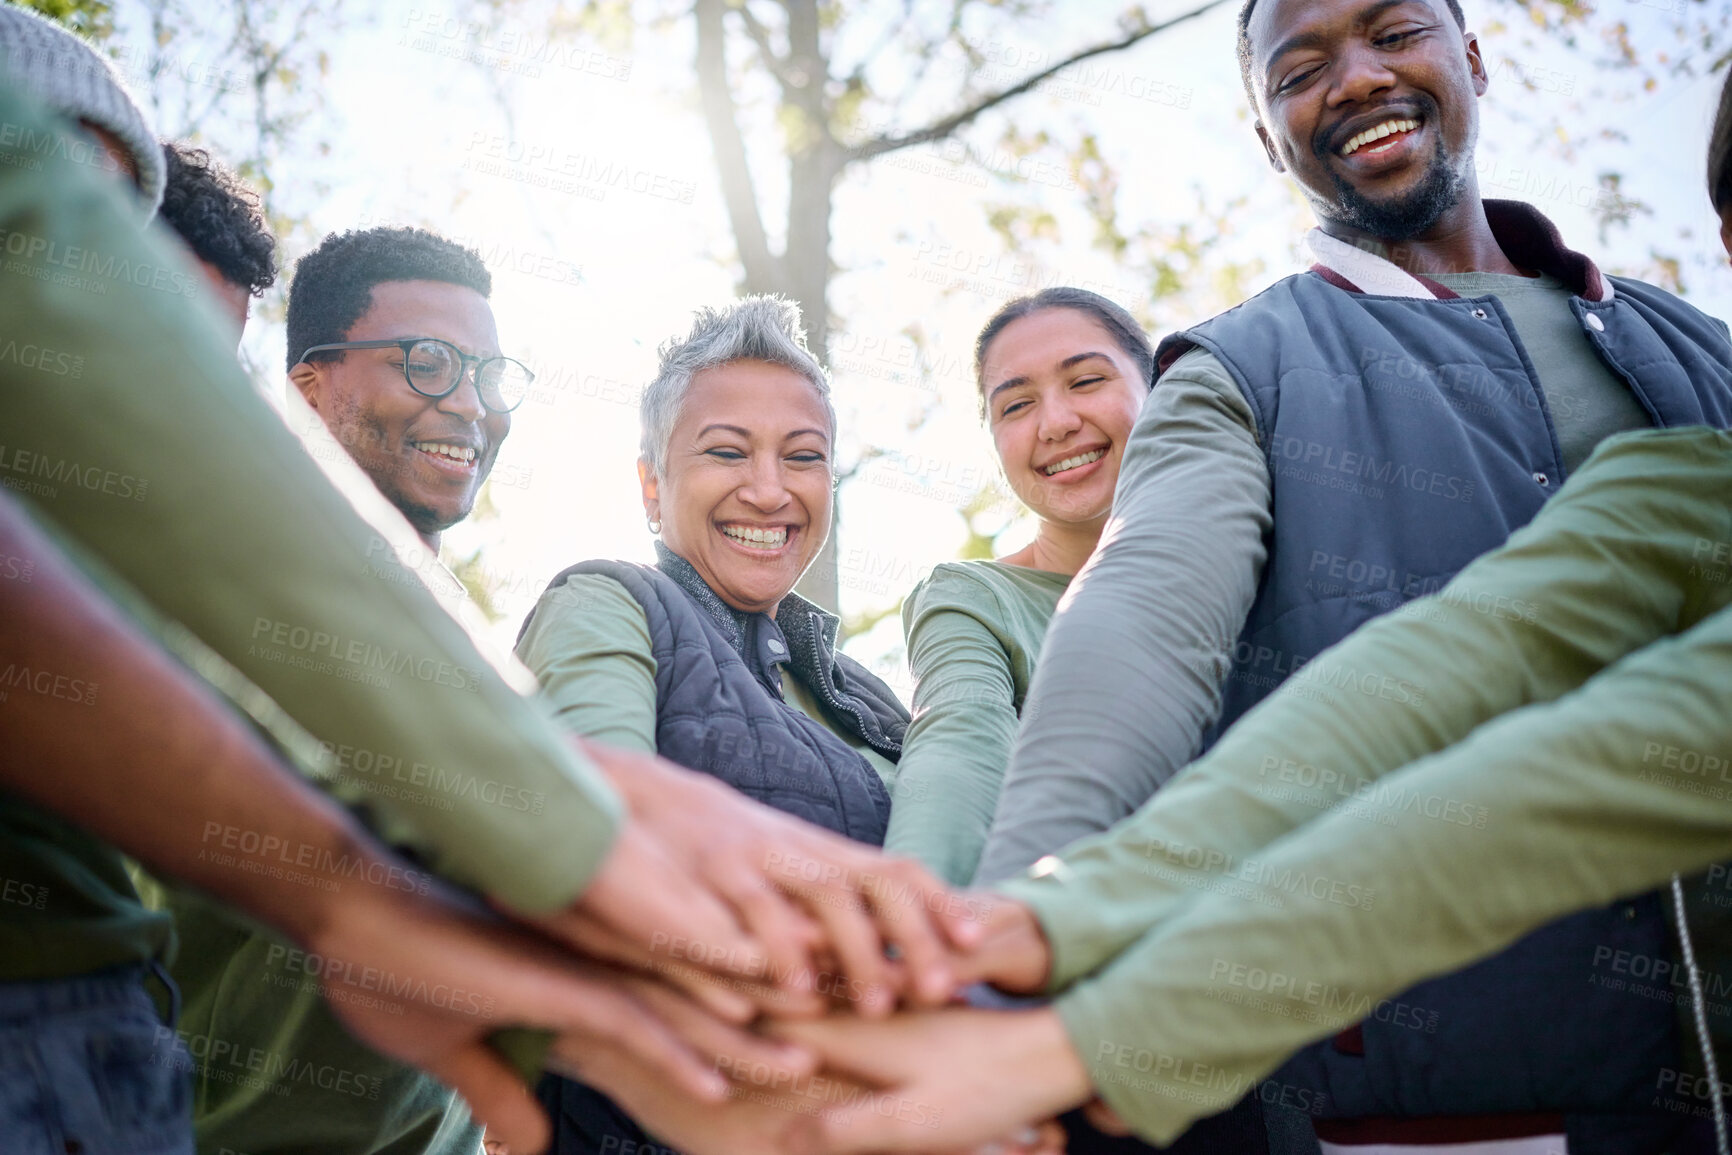 Buy stock photo Teamwork, motivation and huddle with senior friends hiking together in the forest or woods from below. Fitness, exercise or nature with a mature man and woman friend group putting hands in a circle